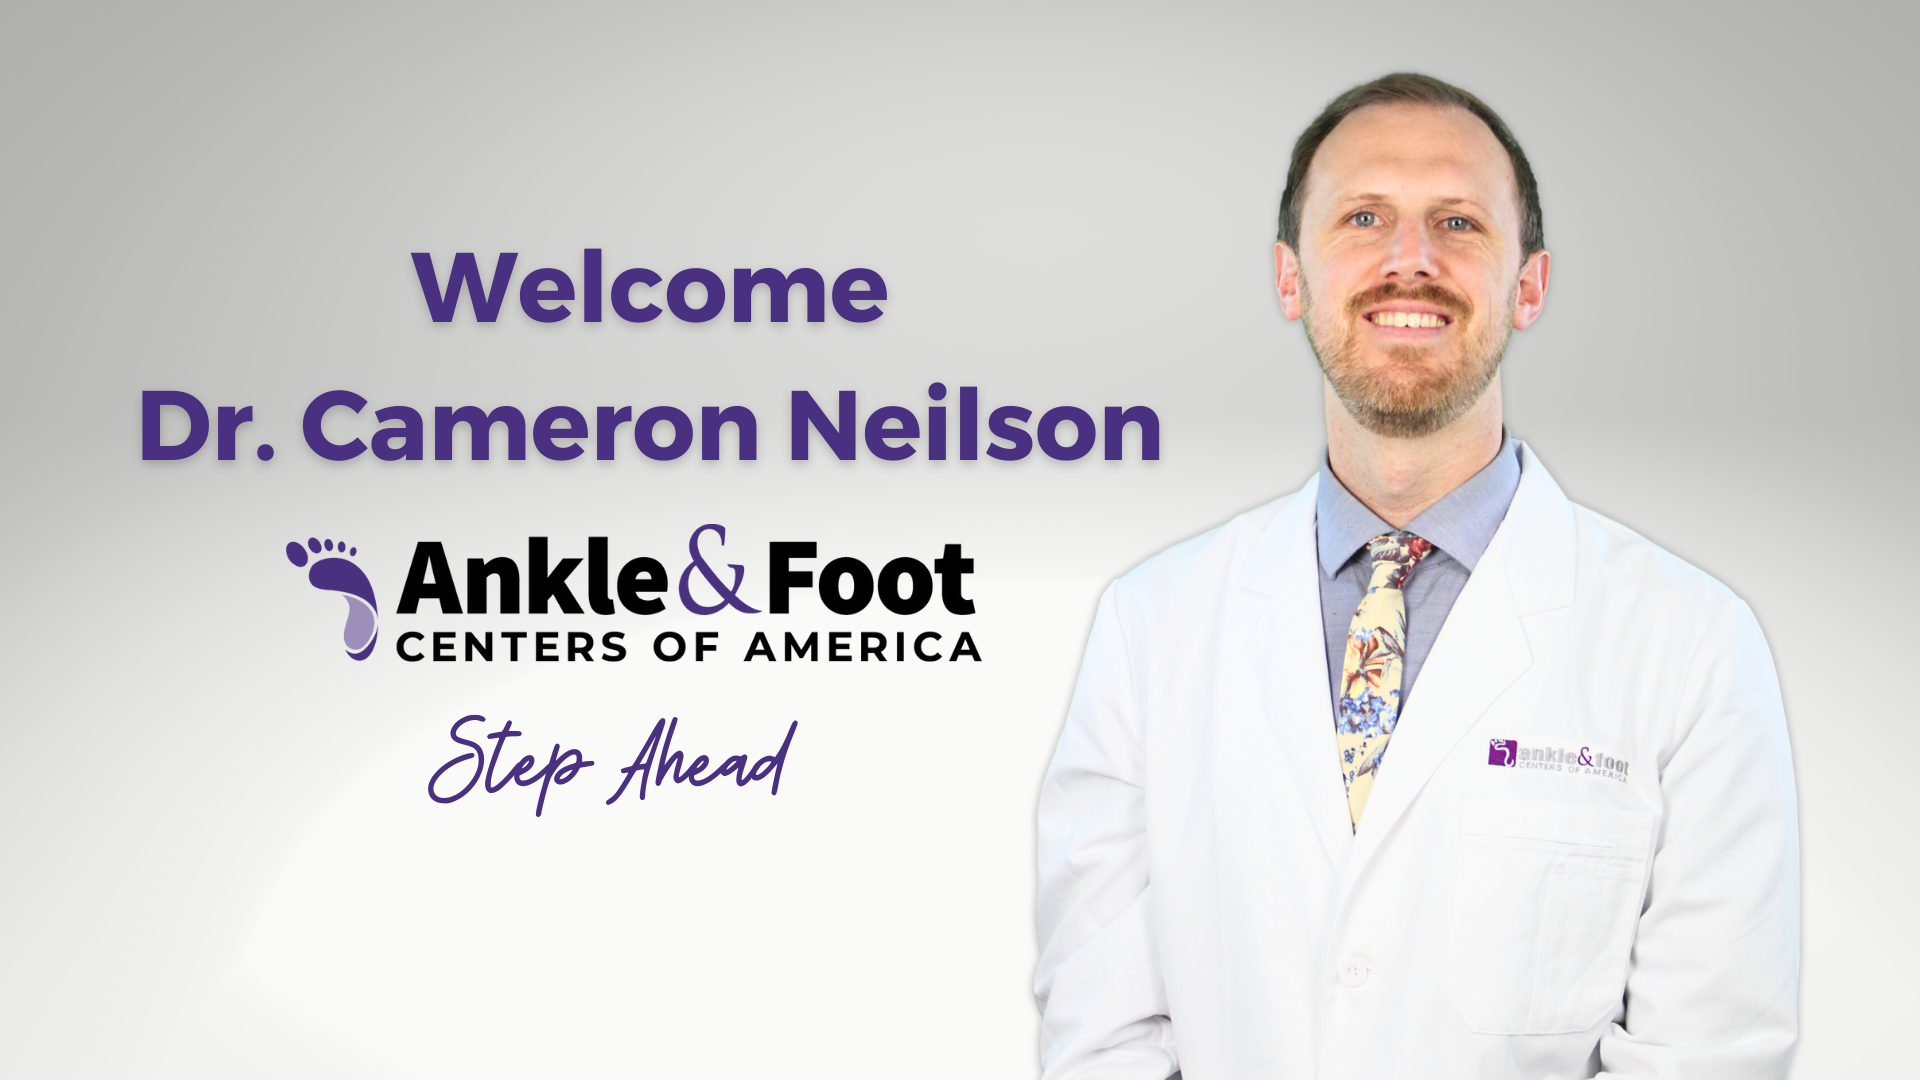 Welcome Dr. Neilson